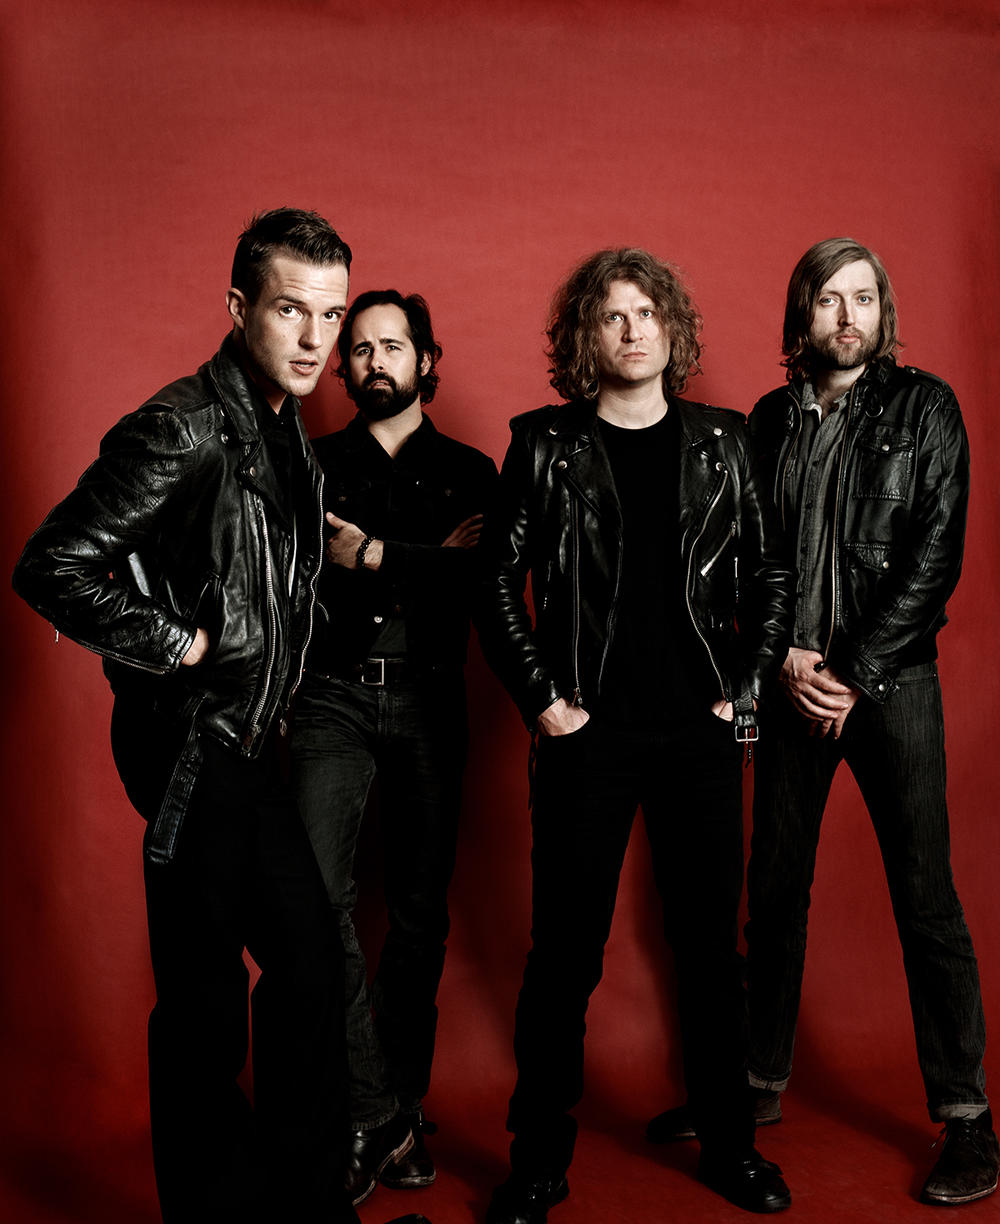 The Killers are headlining this year's Music Midtown festival.